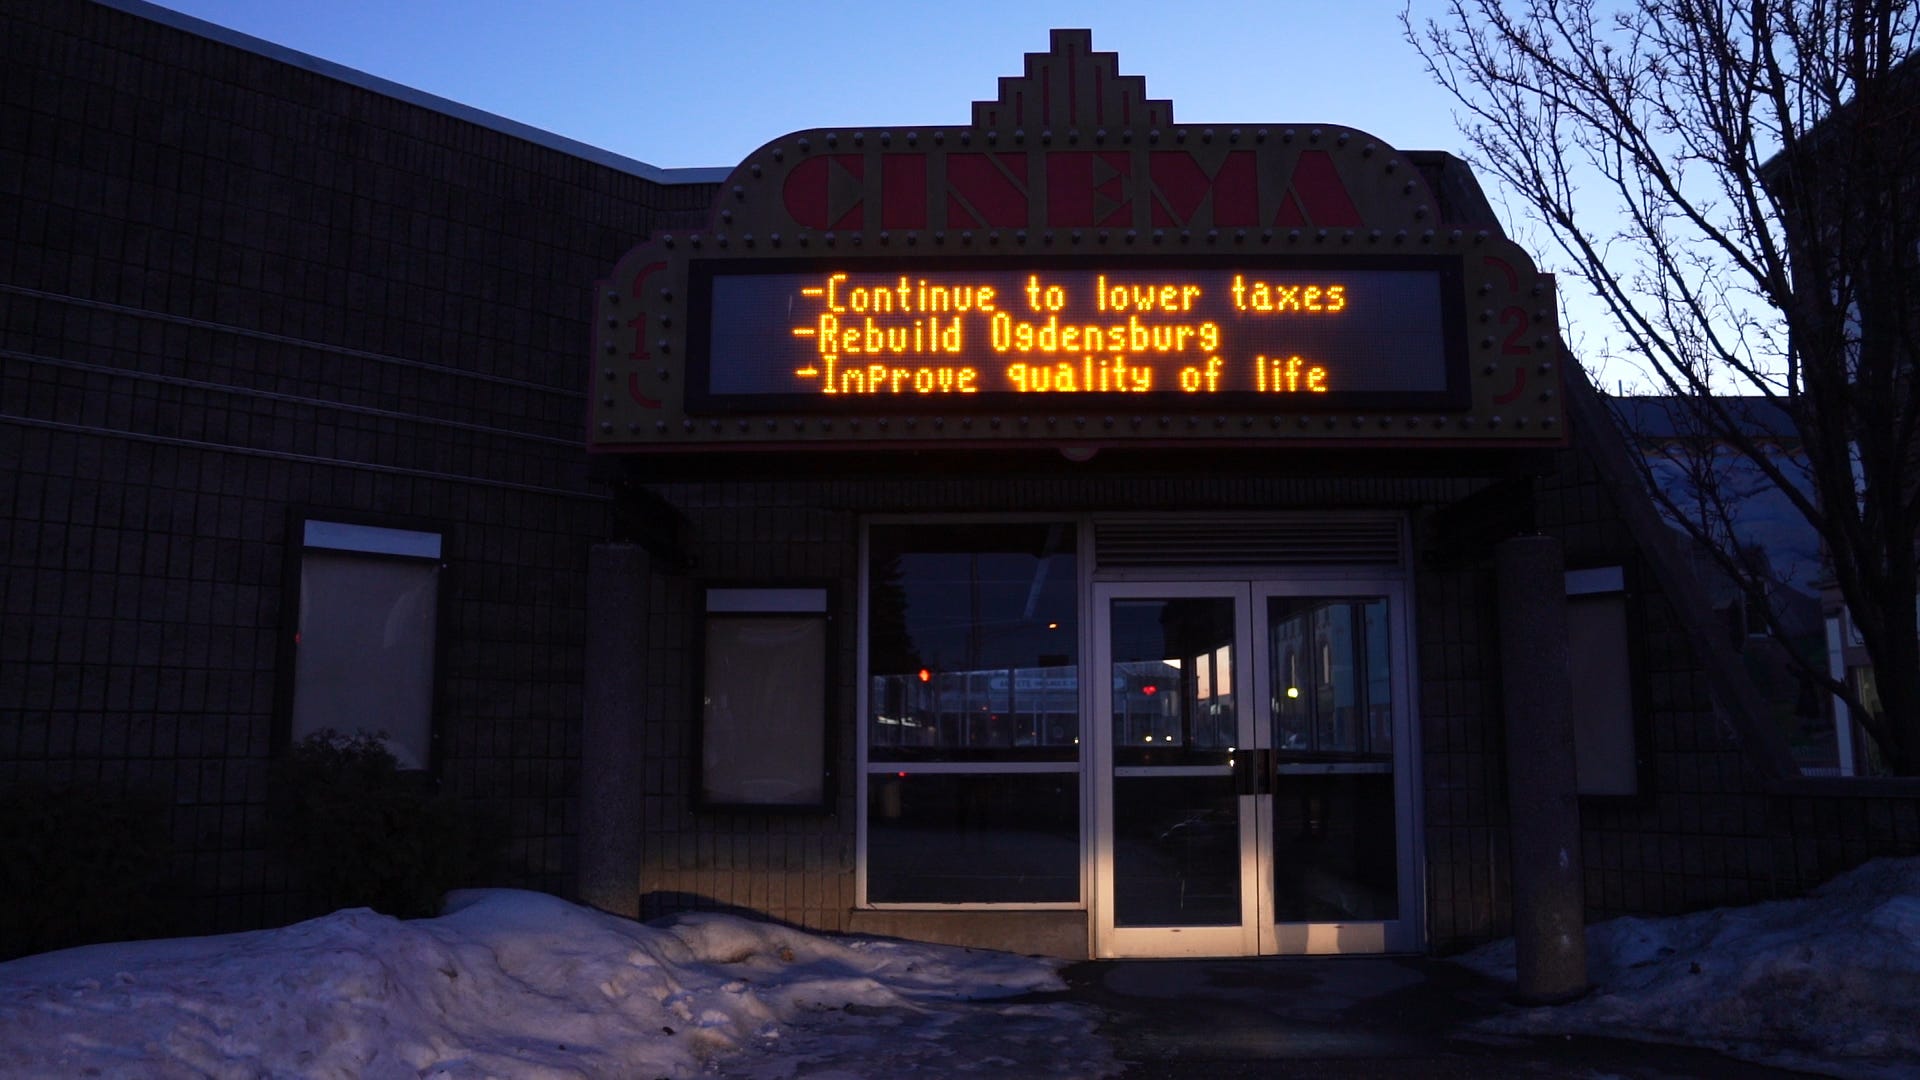 Ogdensburg's shuttered cinema, owned by the city's mayor, displays political messages on its marquee.